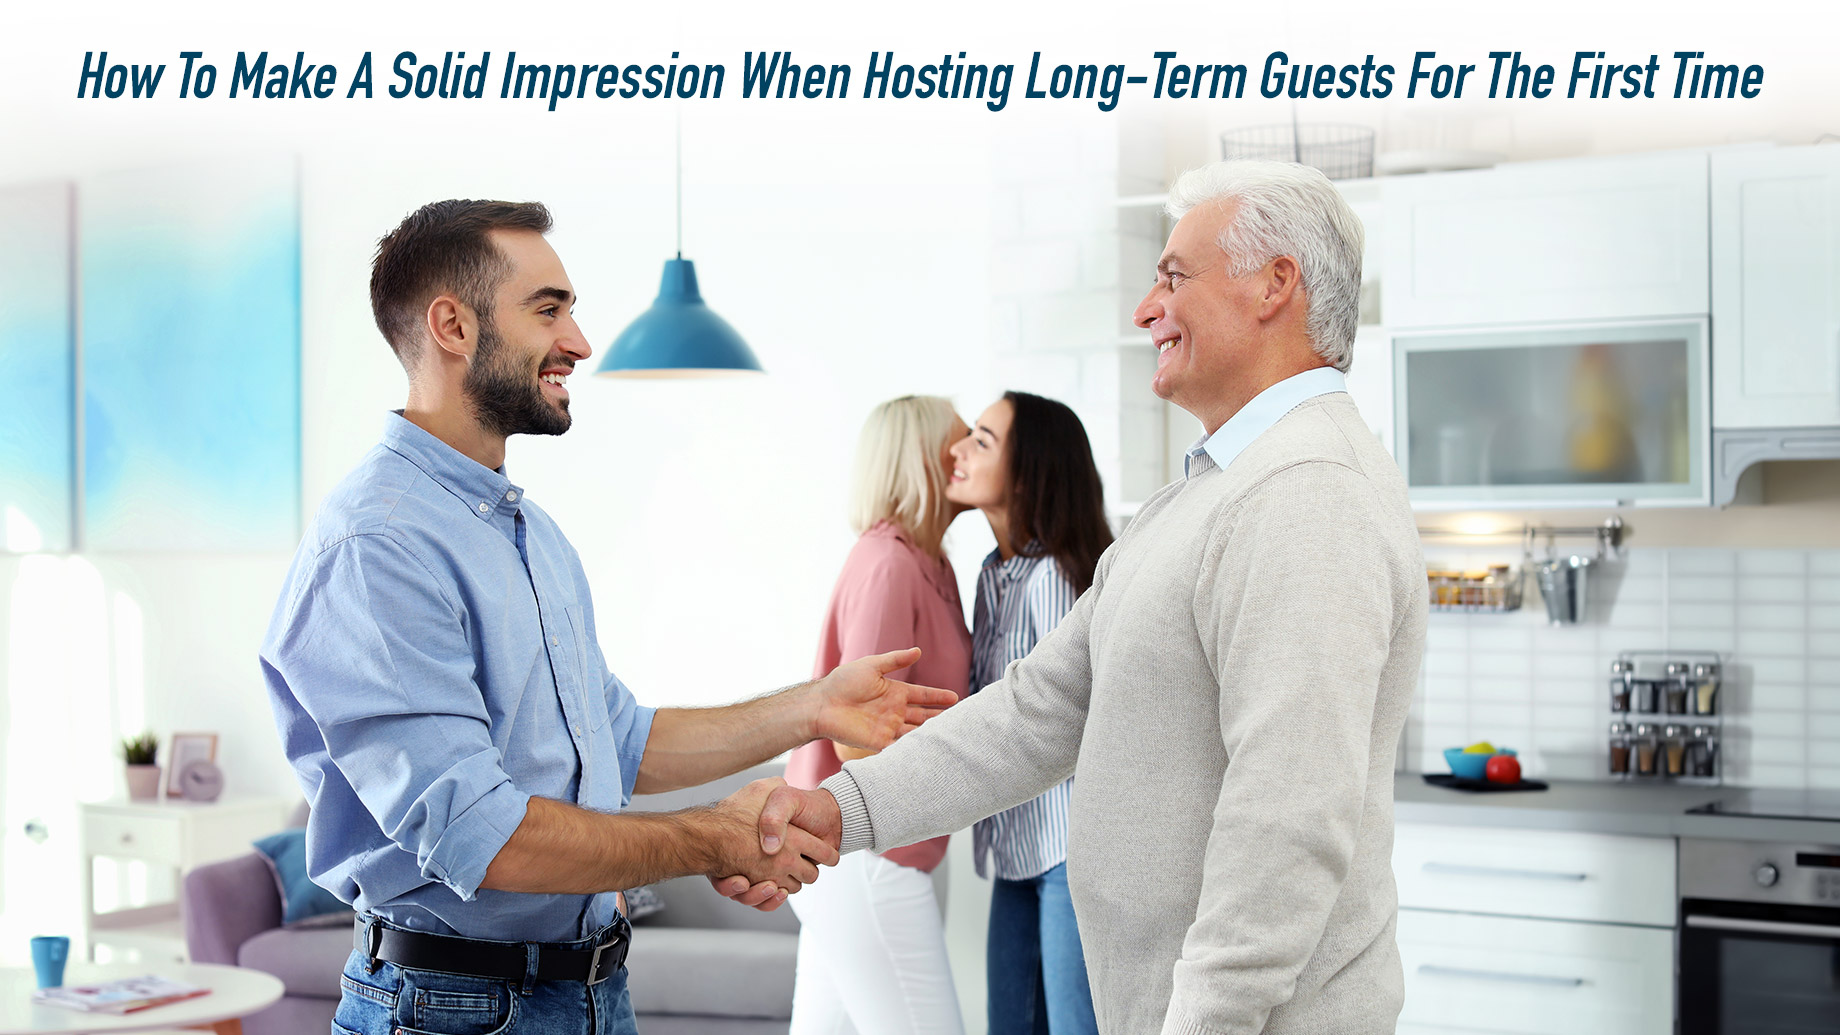 How To Make A Solid Impression When Hosting Long-Term Guests For The First Time